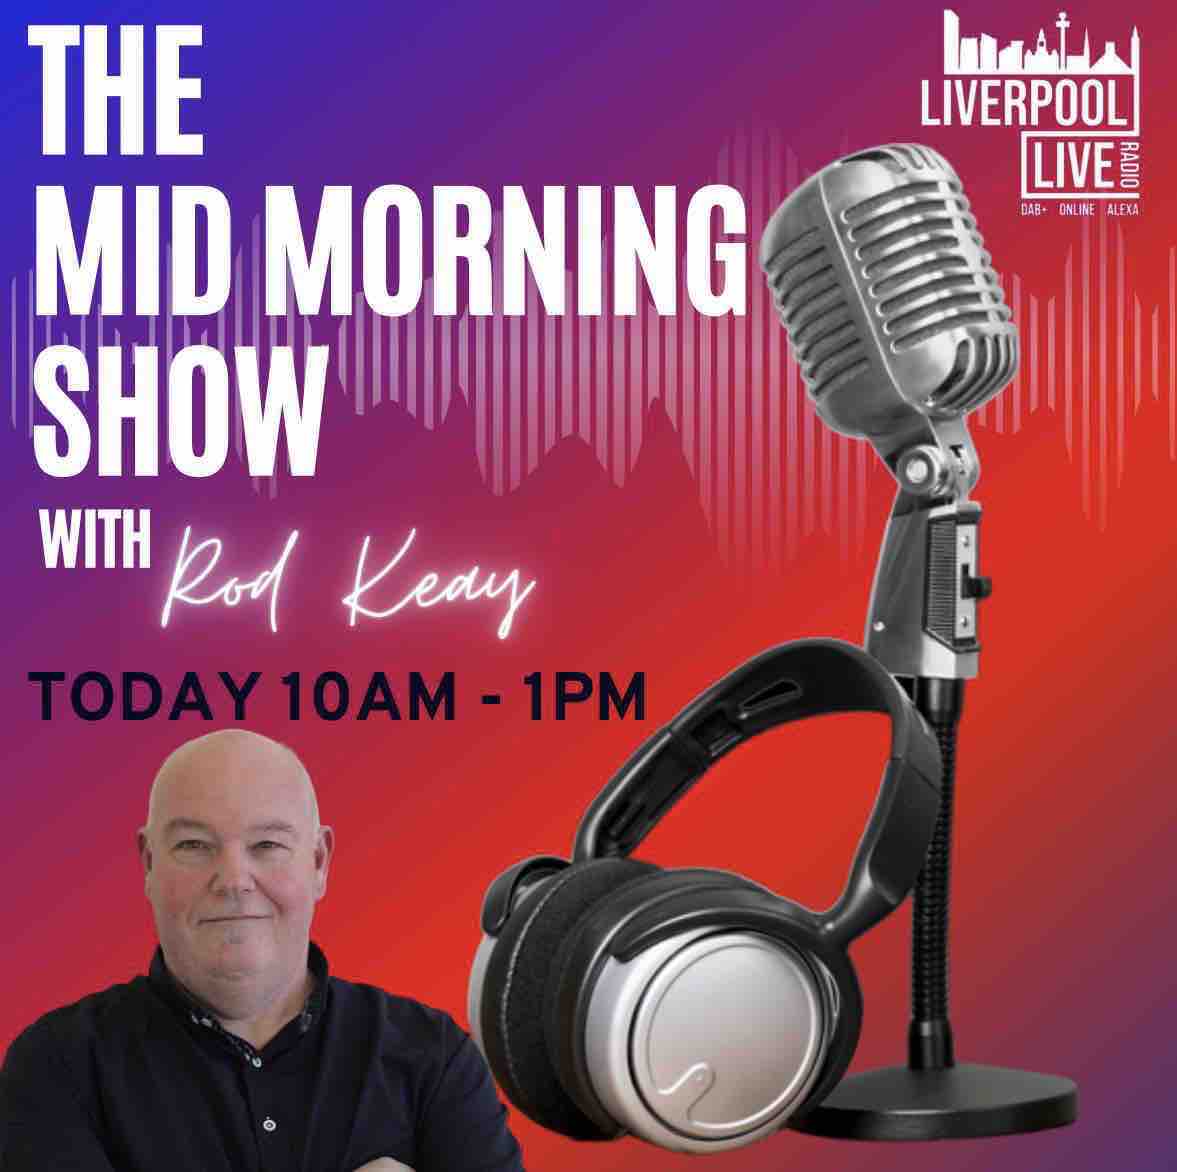 It’s Rod Keay hosing your mid morning show today and it’s Thursday so that means Later in the show he will be joined on the line by Stacey Jackson and following that it’s our regular segment #liverpoolspeaks !